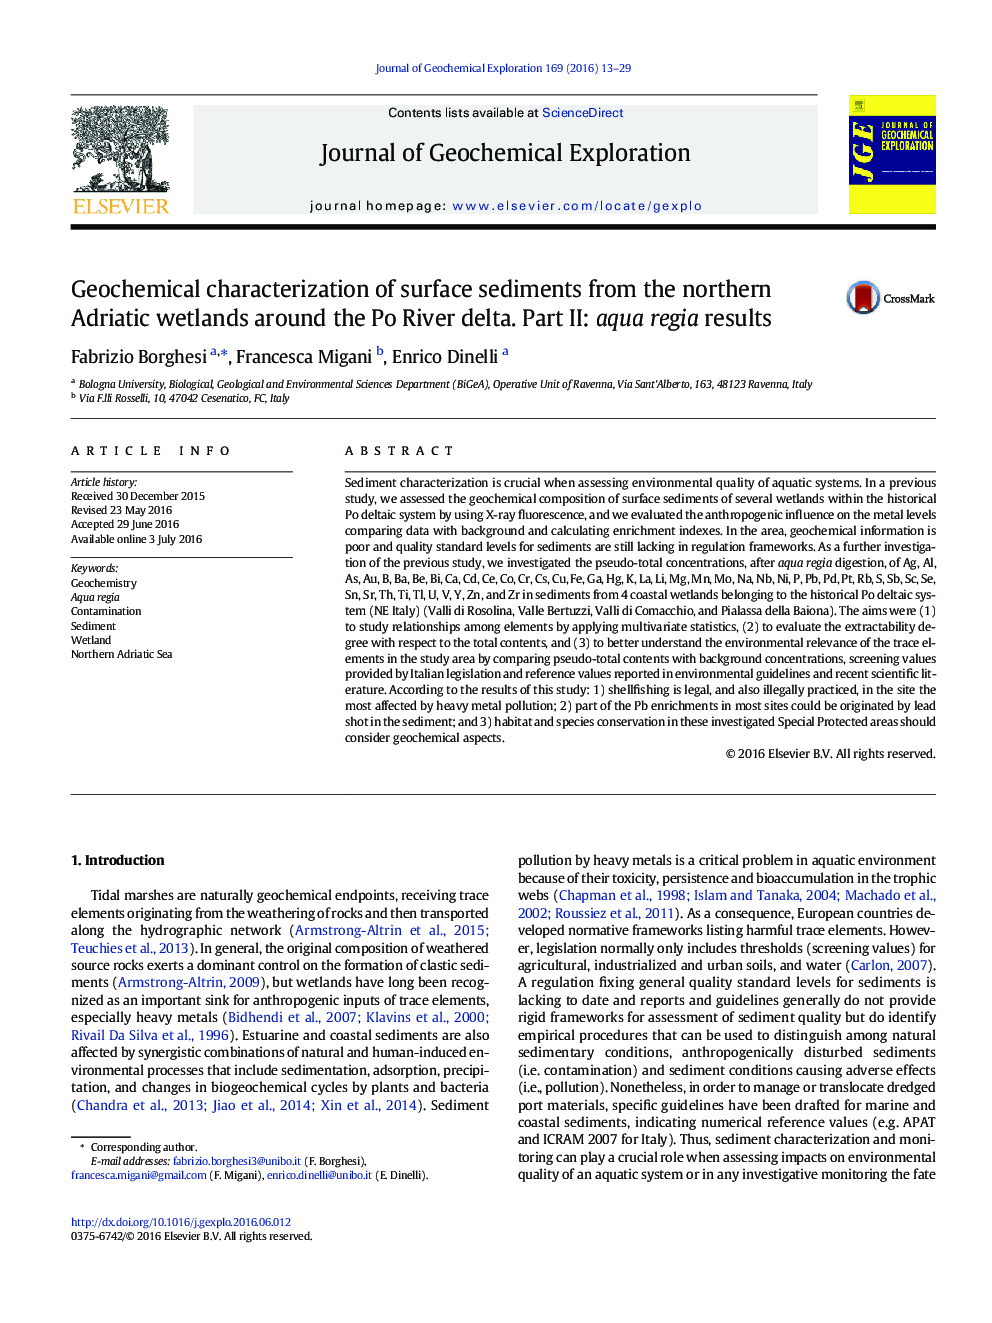 Geochemical characterization of surface sediments from the northern Adriatic wetlands around the Po River delta. Part II: aqua regia results